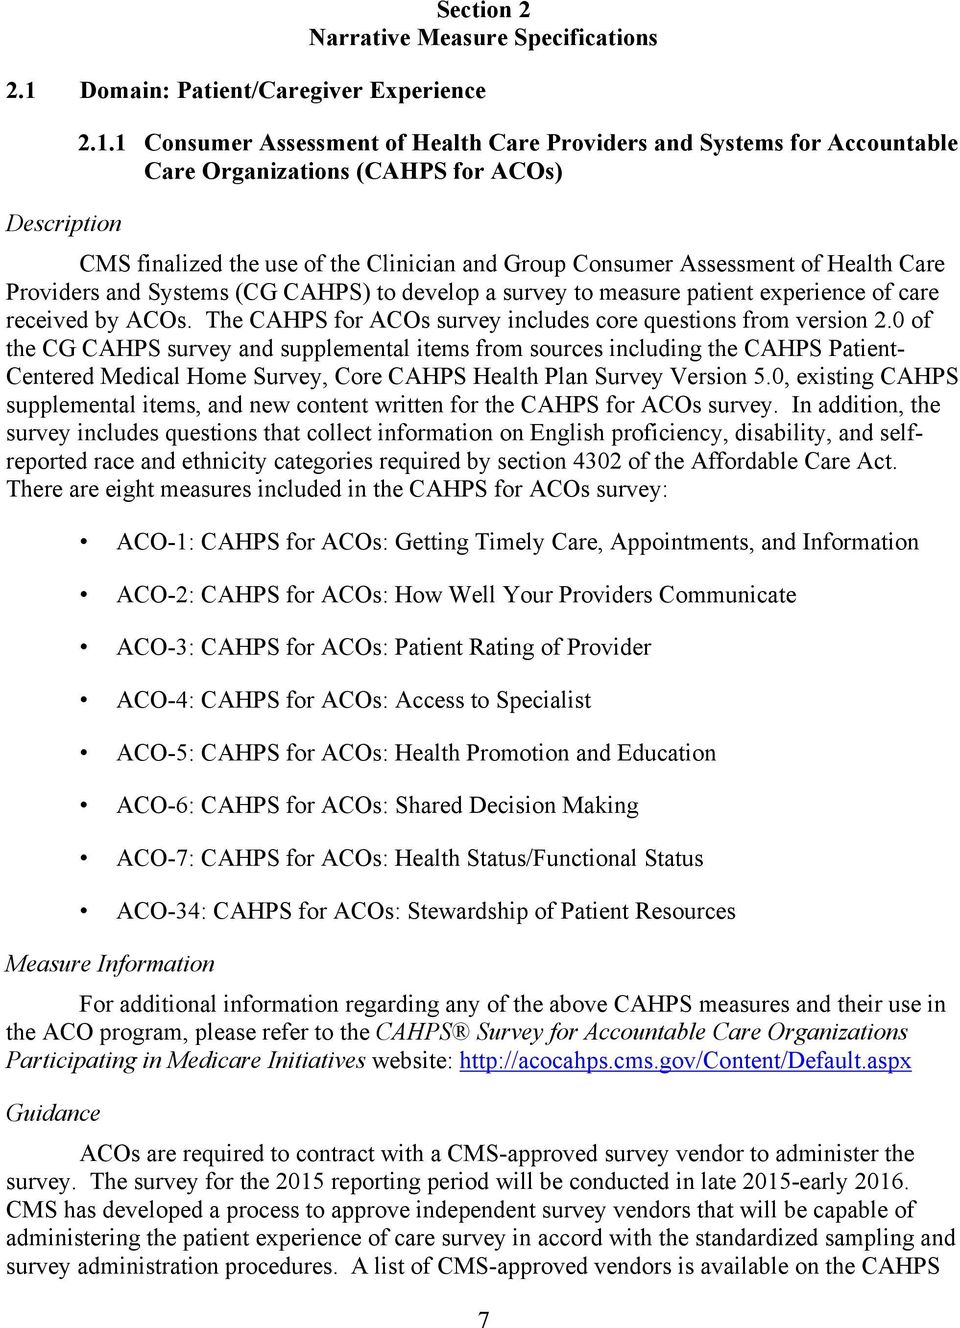 1 Consumer Assessment of Health Care Providers and Systems for Accountable Care Organizations (CAHPS for ACOs) CMS finalized the use of the Clinician and Group Consumer Assessment of Health Care